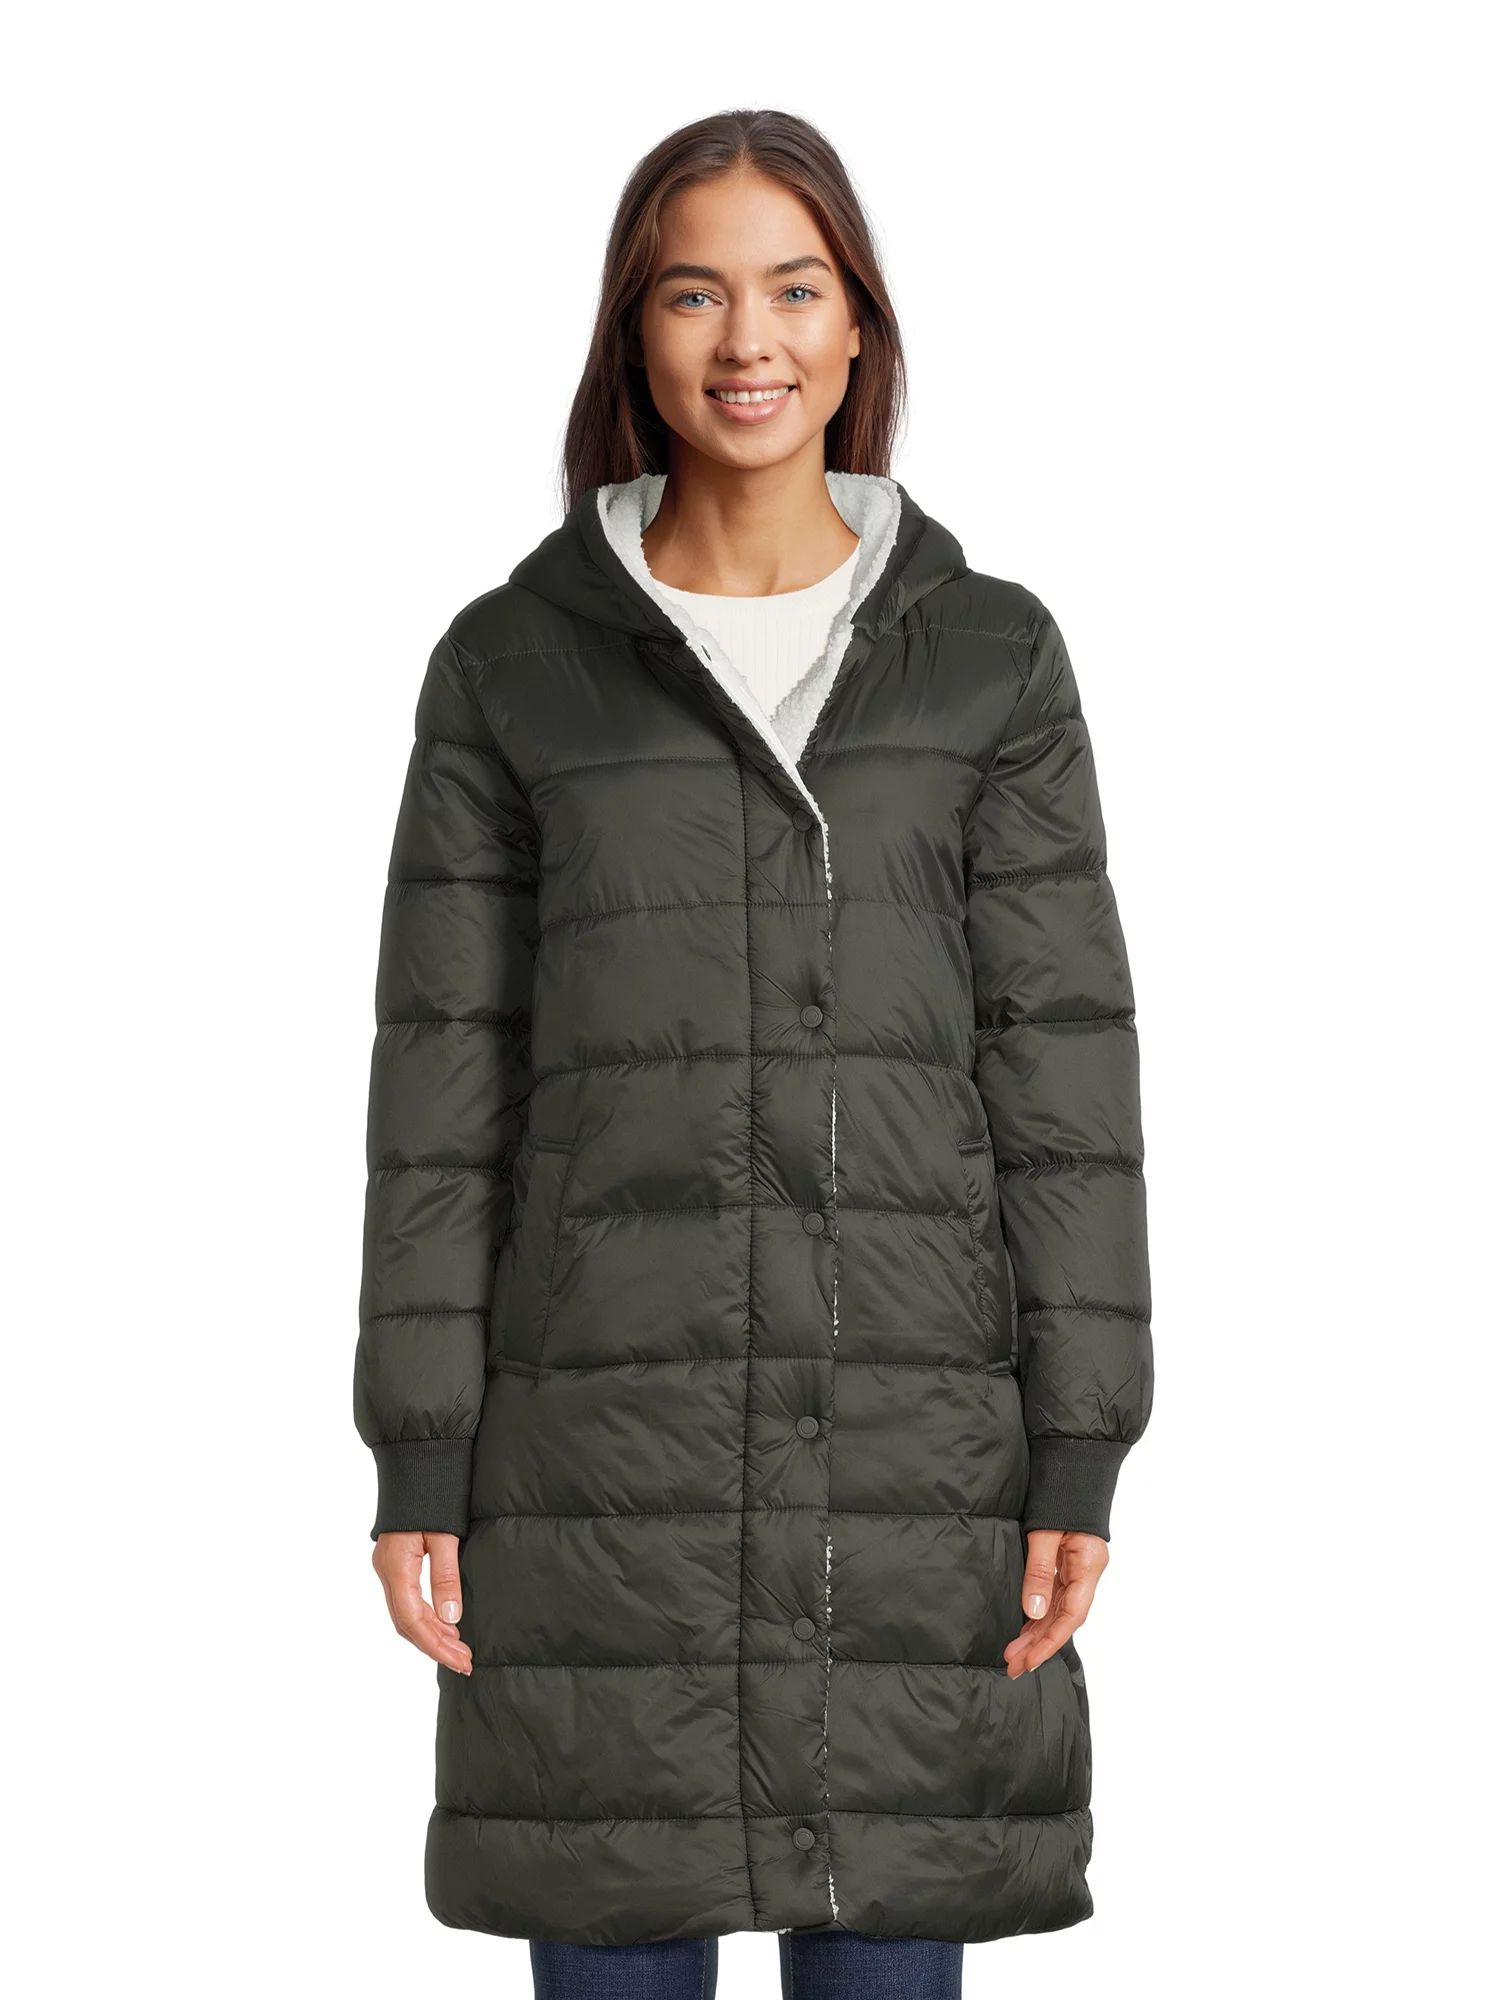 Alyned Together Women's Lined Hooded Puffer Coat | Walmart (US)